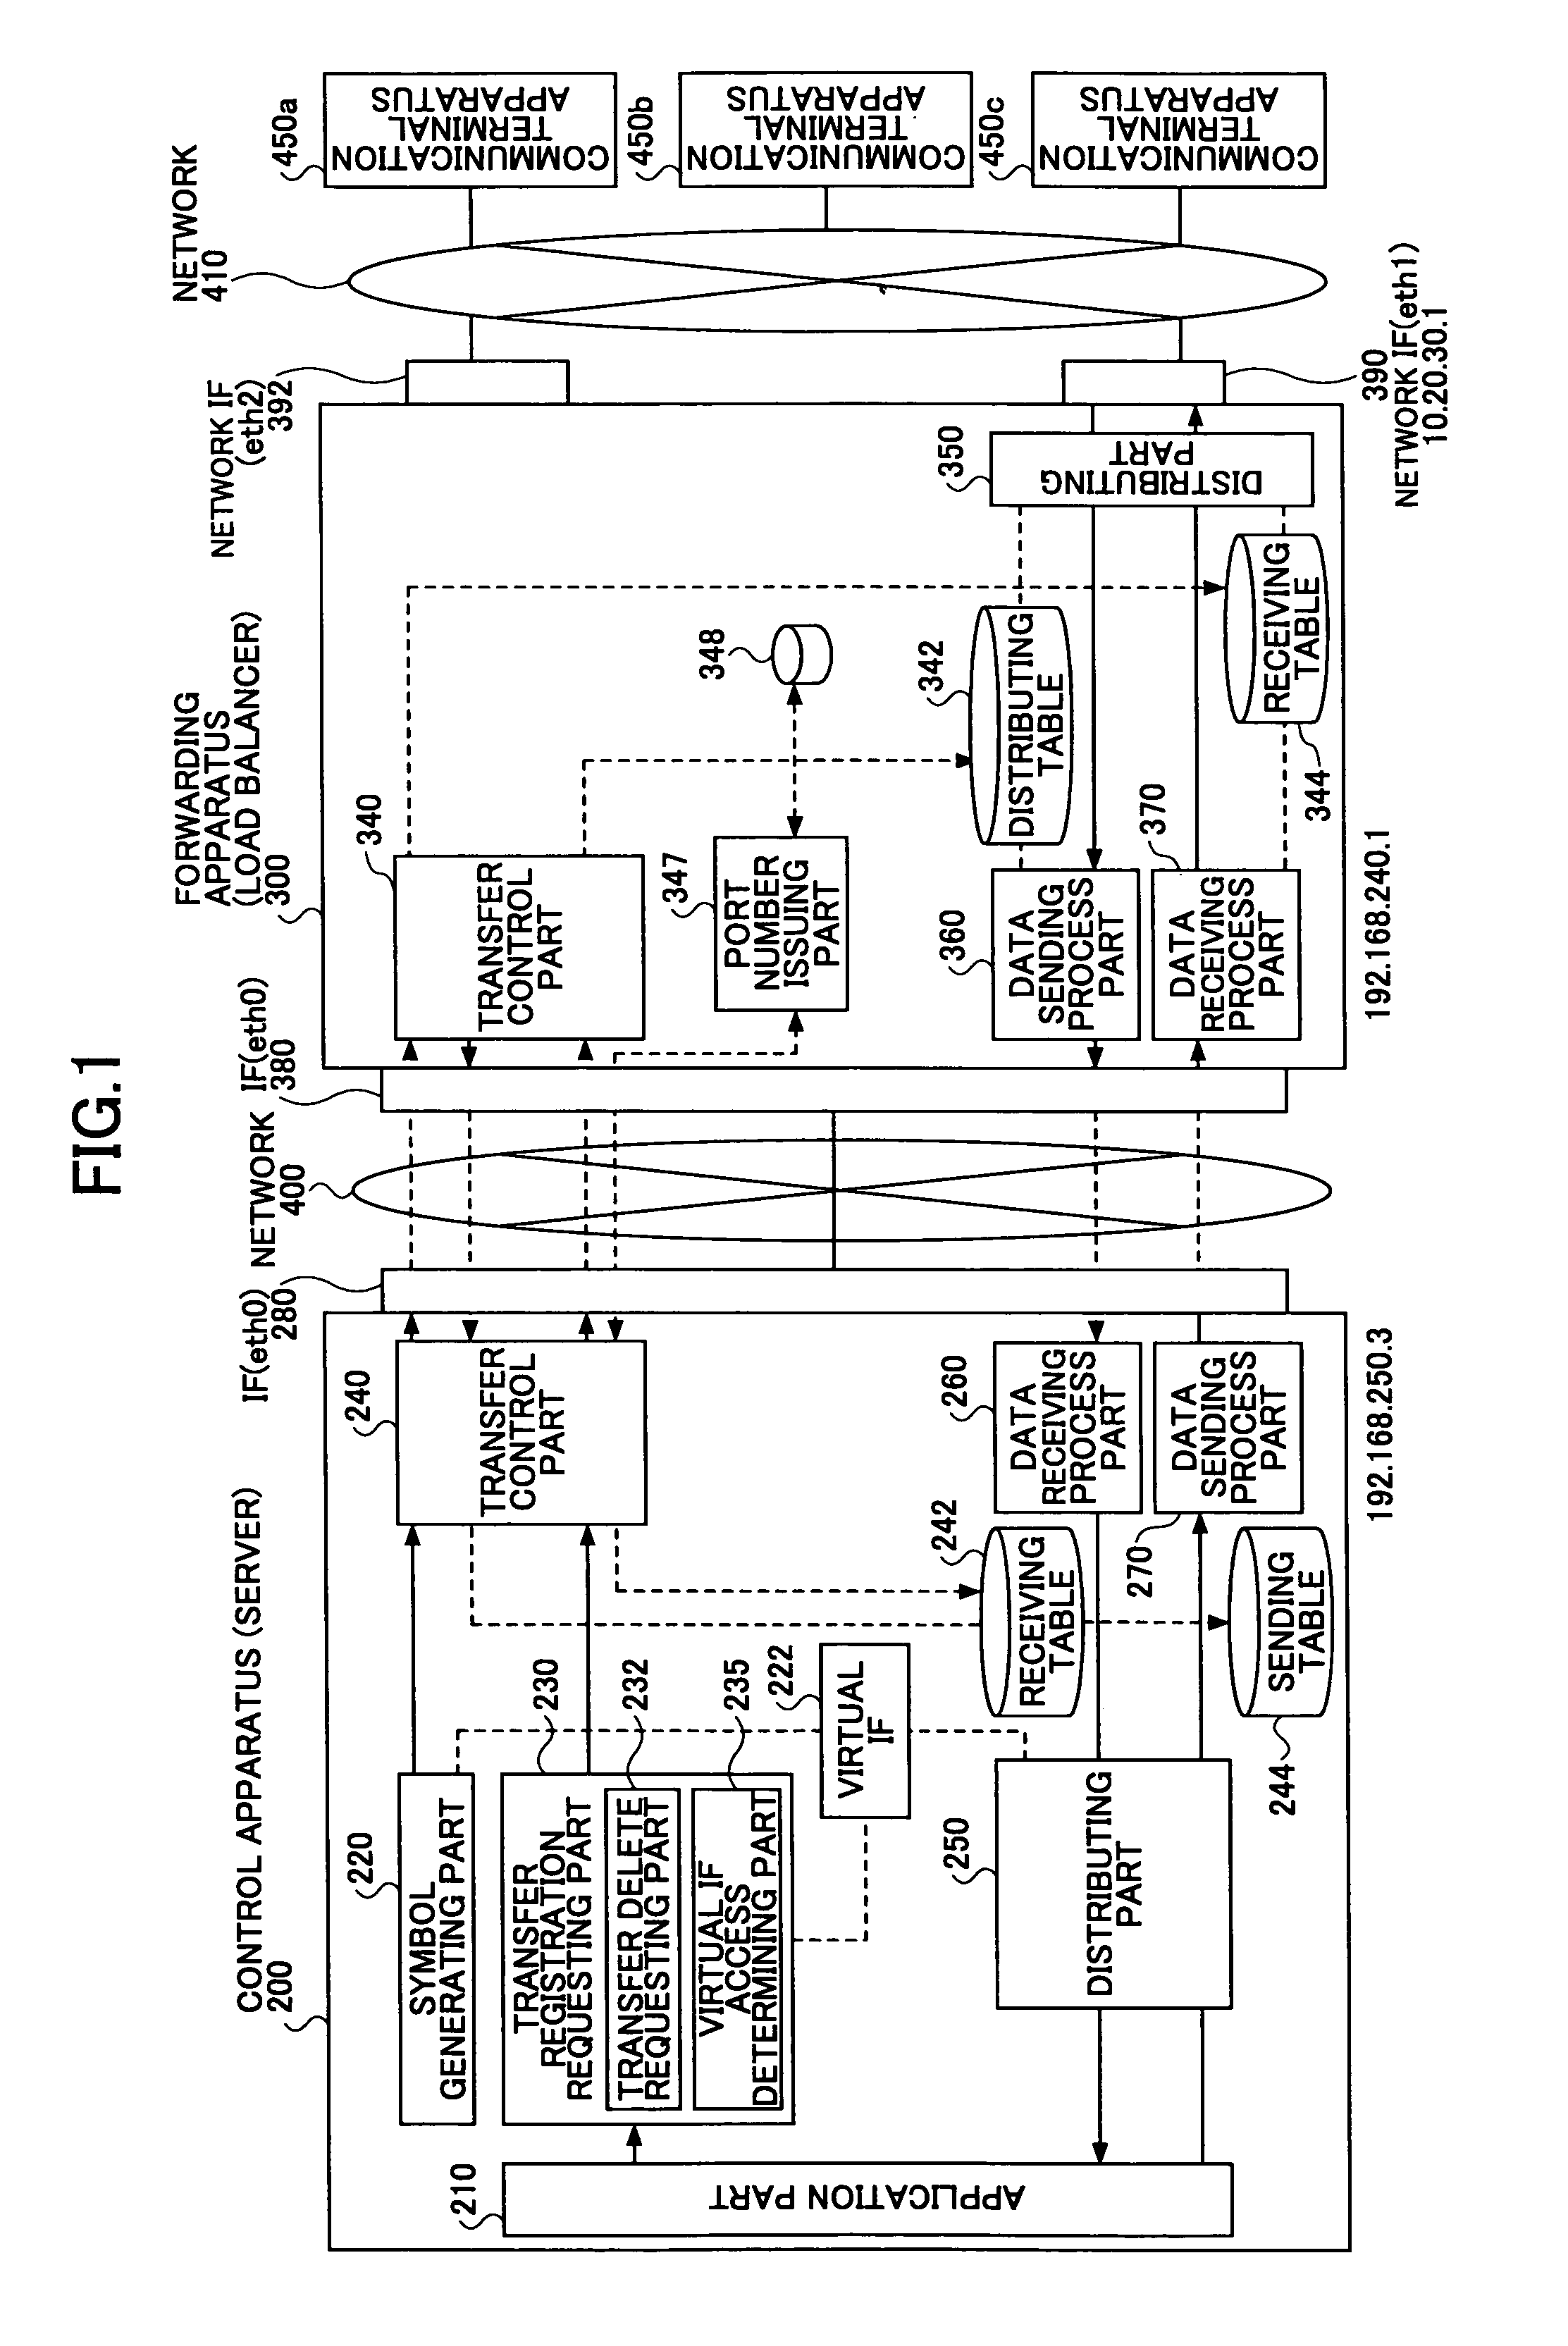 Packet processing system